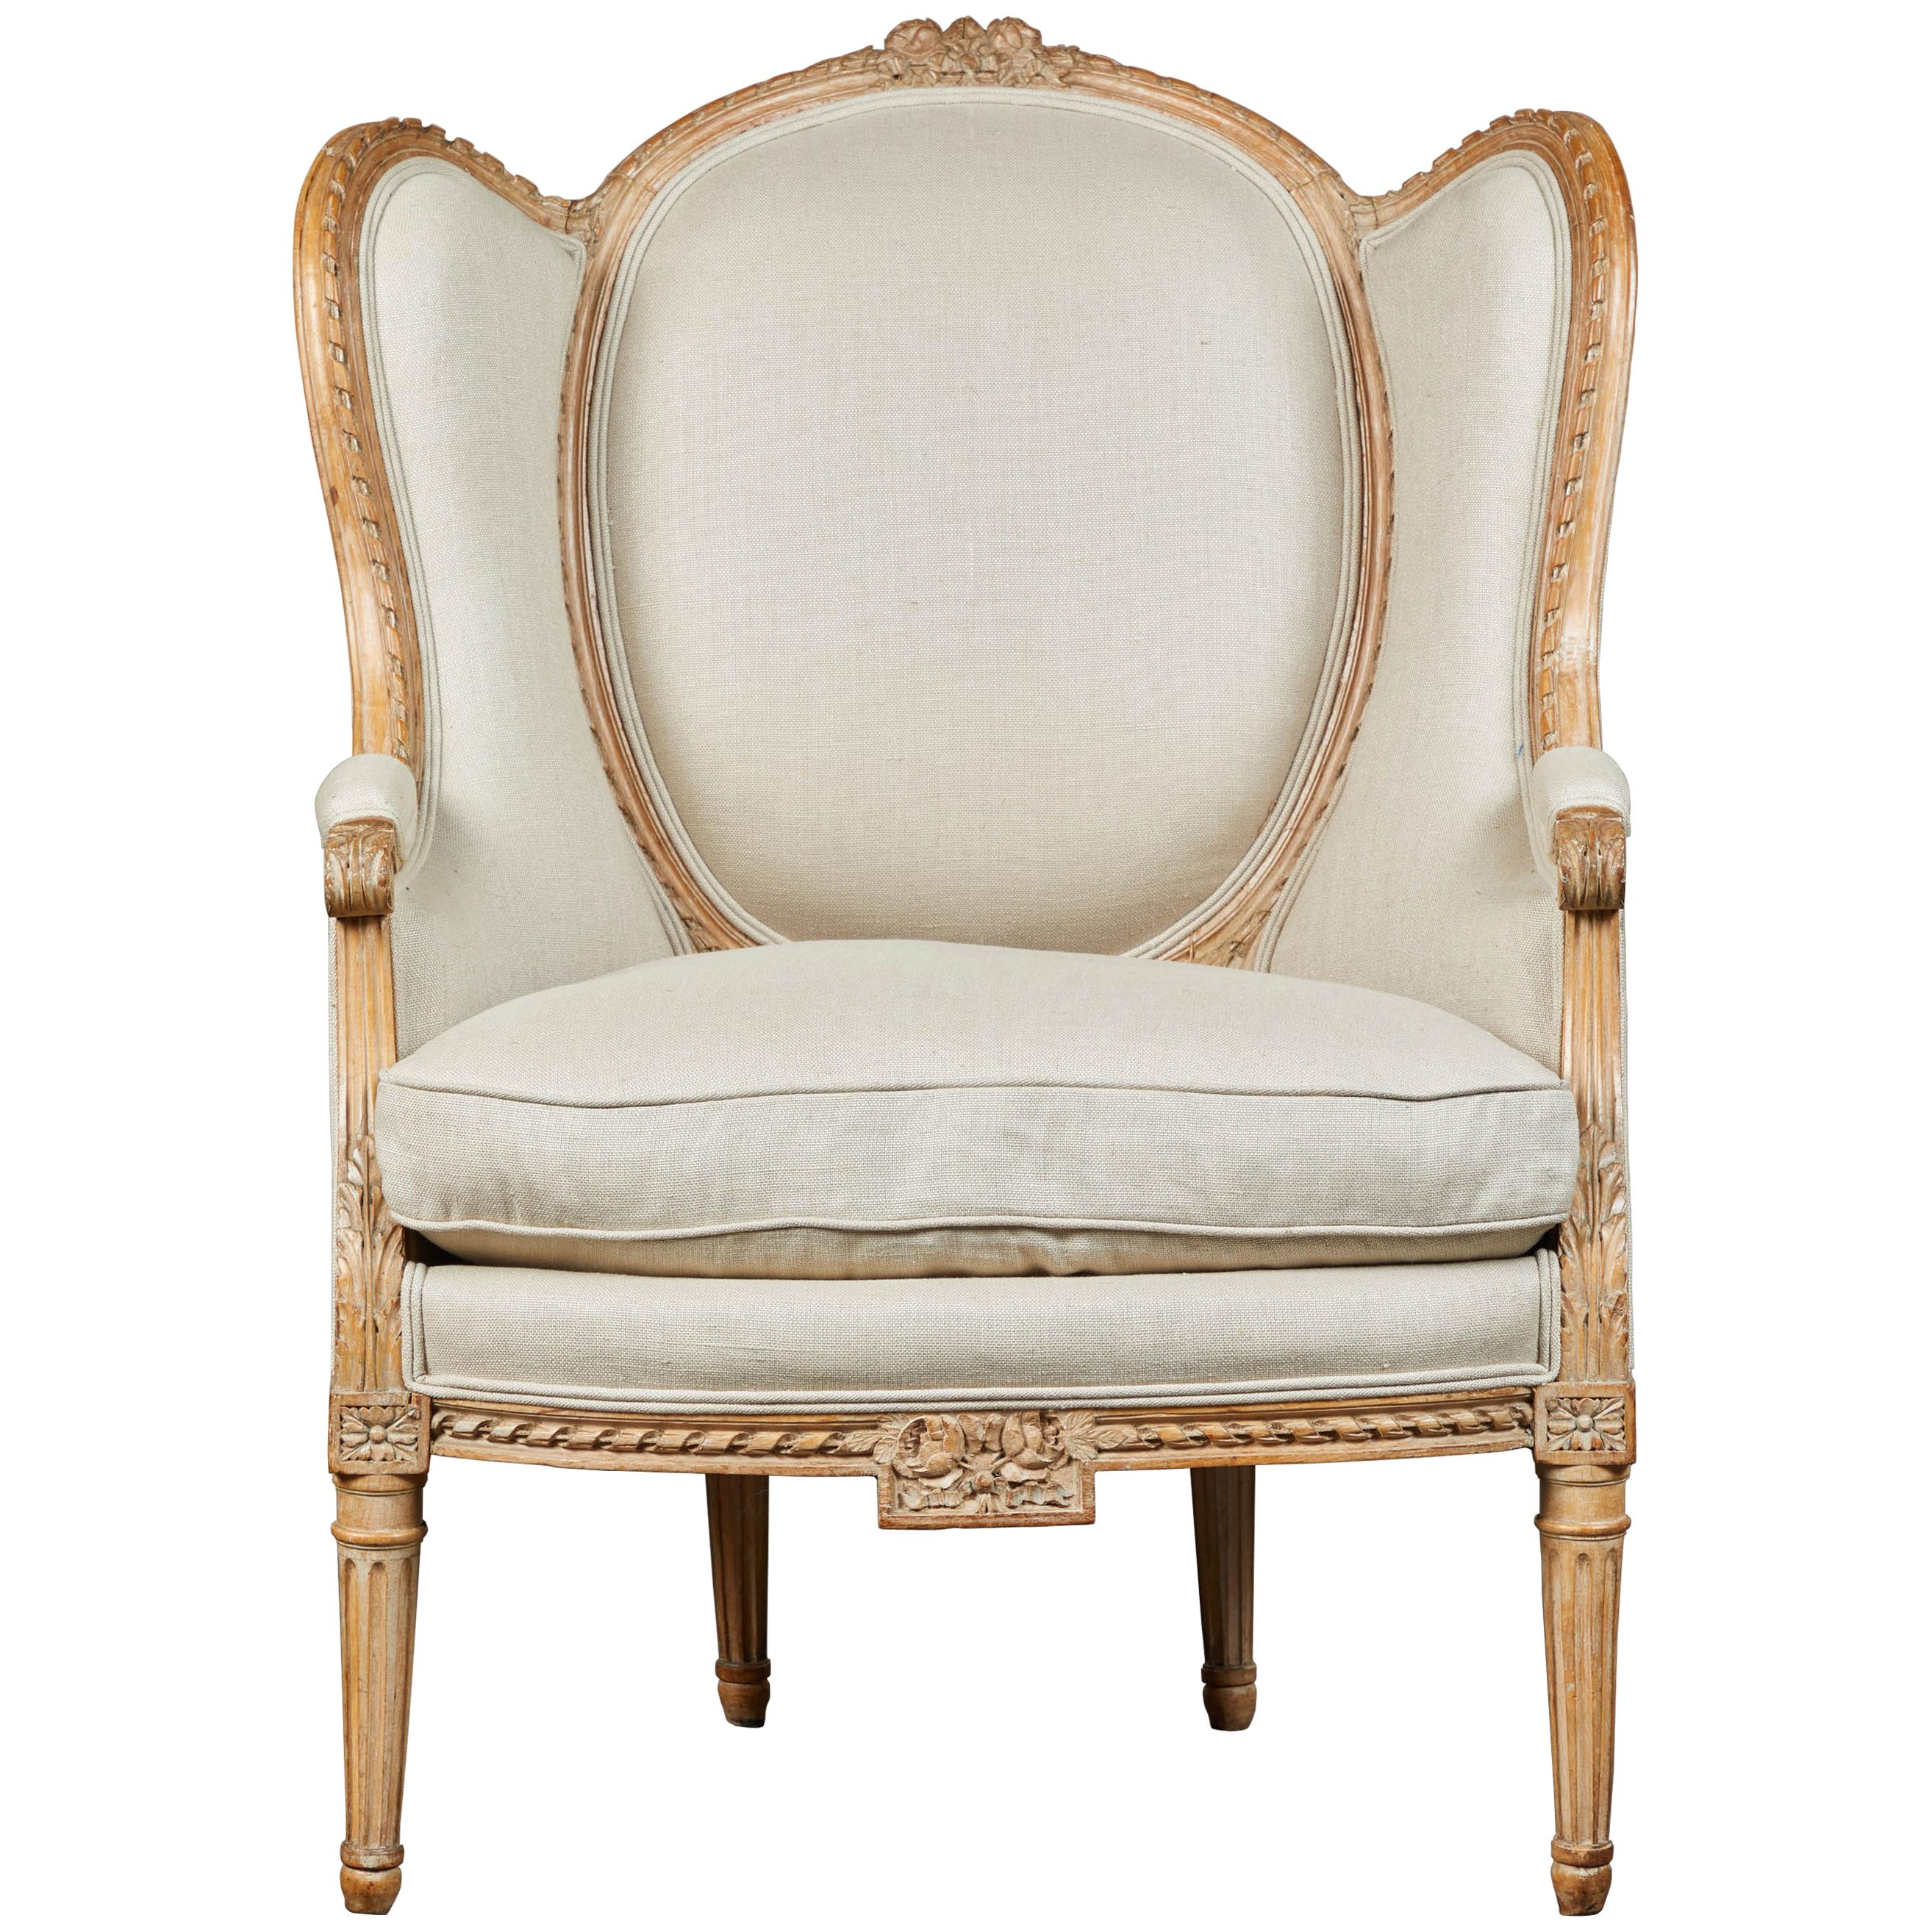 19th Century French Carved Chair with Beige Upholstery For Sale